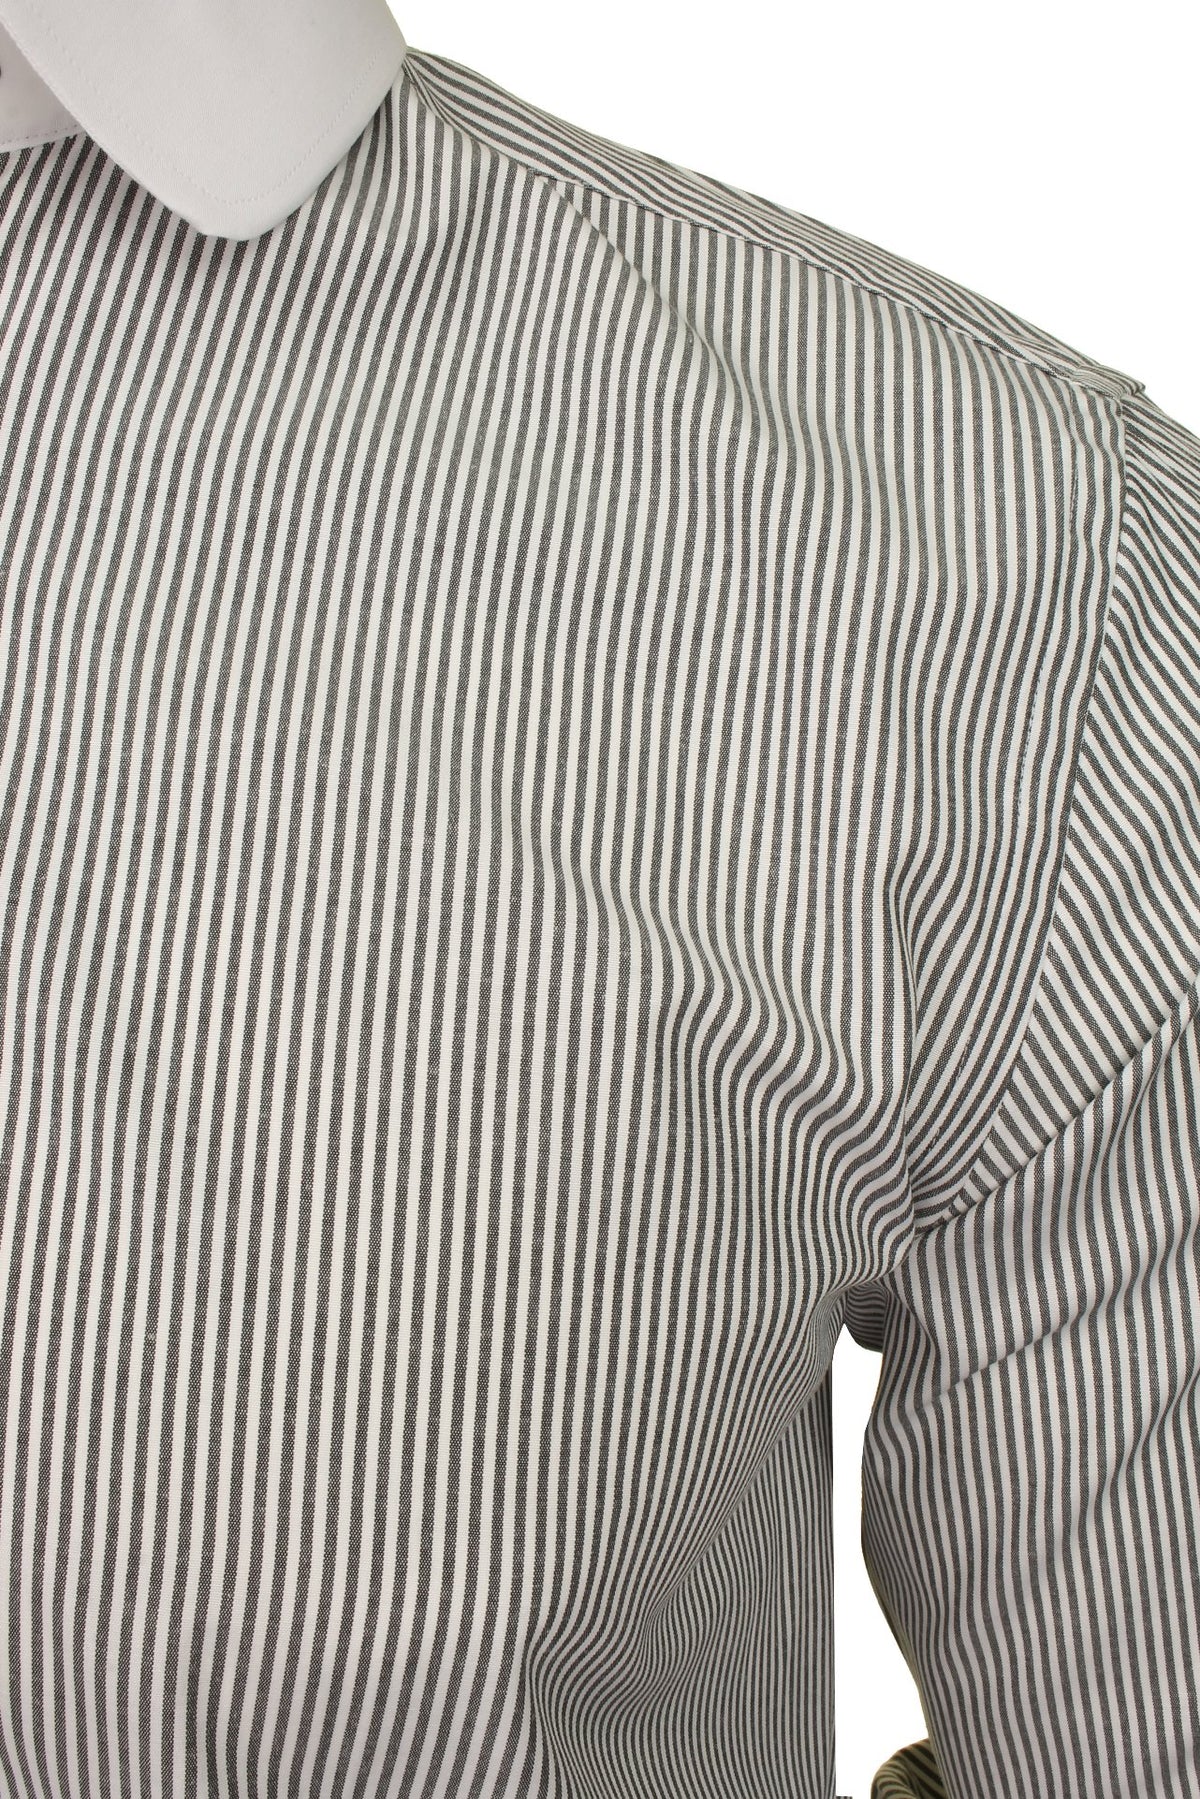 Xact Men's Long-Sleeved Striped Shirt with White Penny/Club Collar and White Cuffs, 02, Xsh1092, White Collar - Dark Grey Stripe